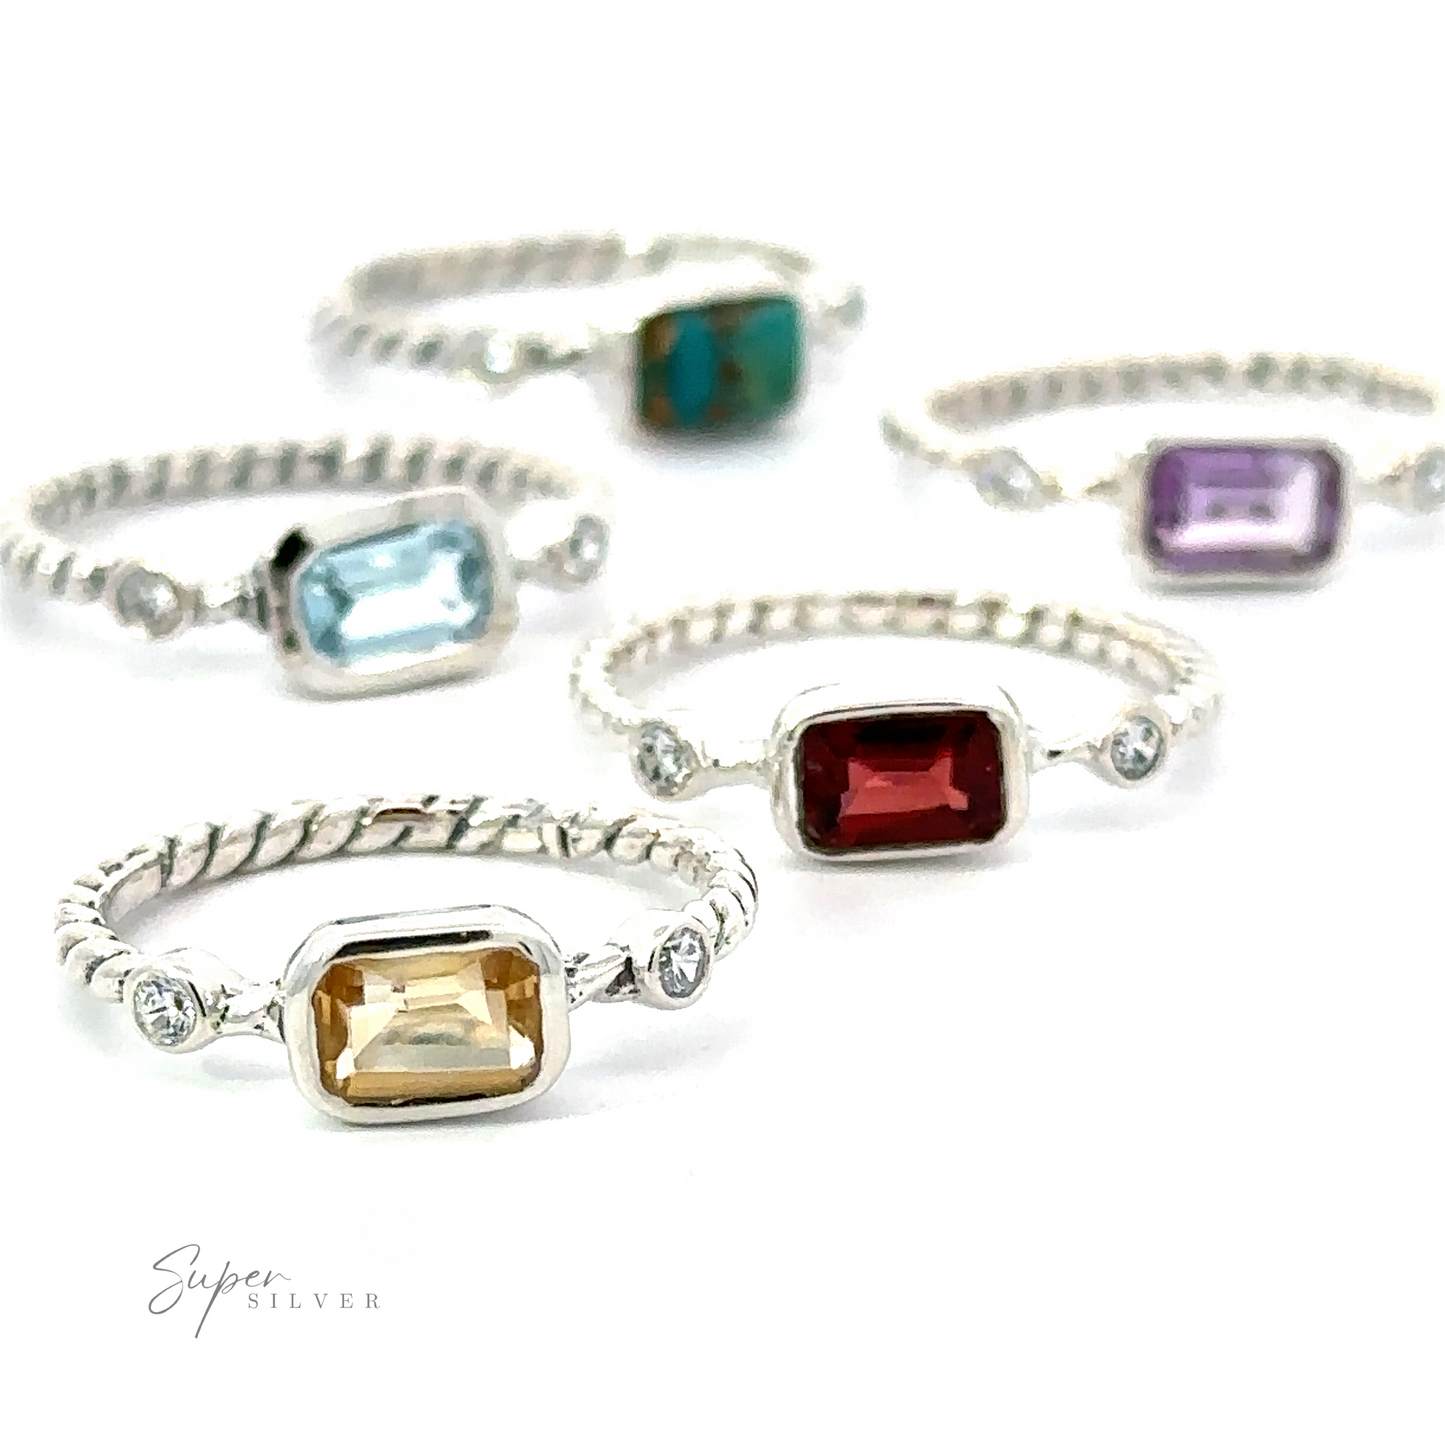 Assorted gemstone rings with different cuts and settings, including a Rectangle Gemstone Ring with Twisted Band, displayed on a white background.